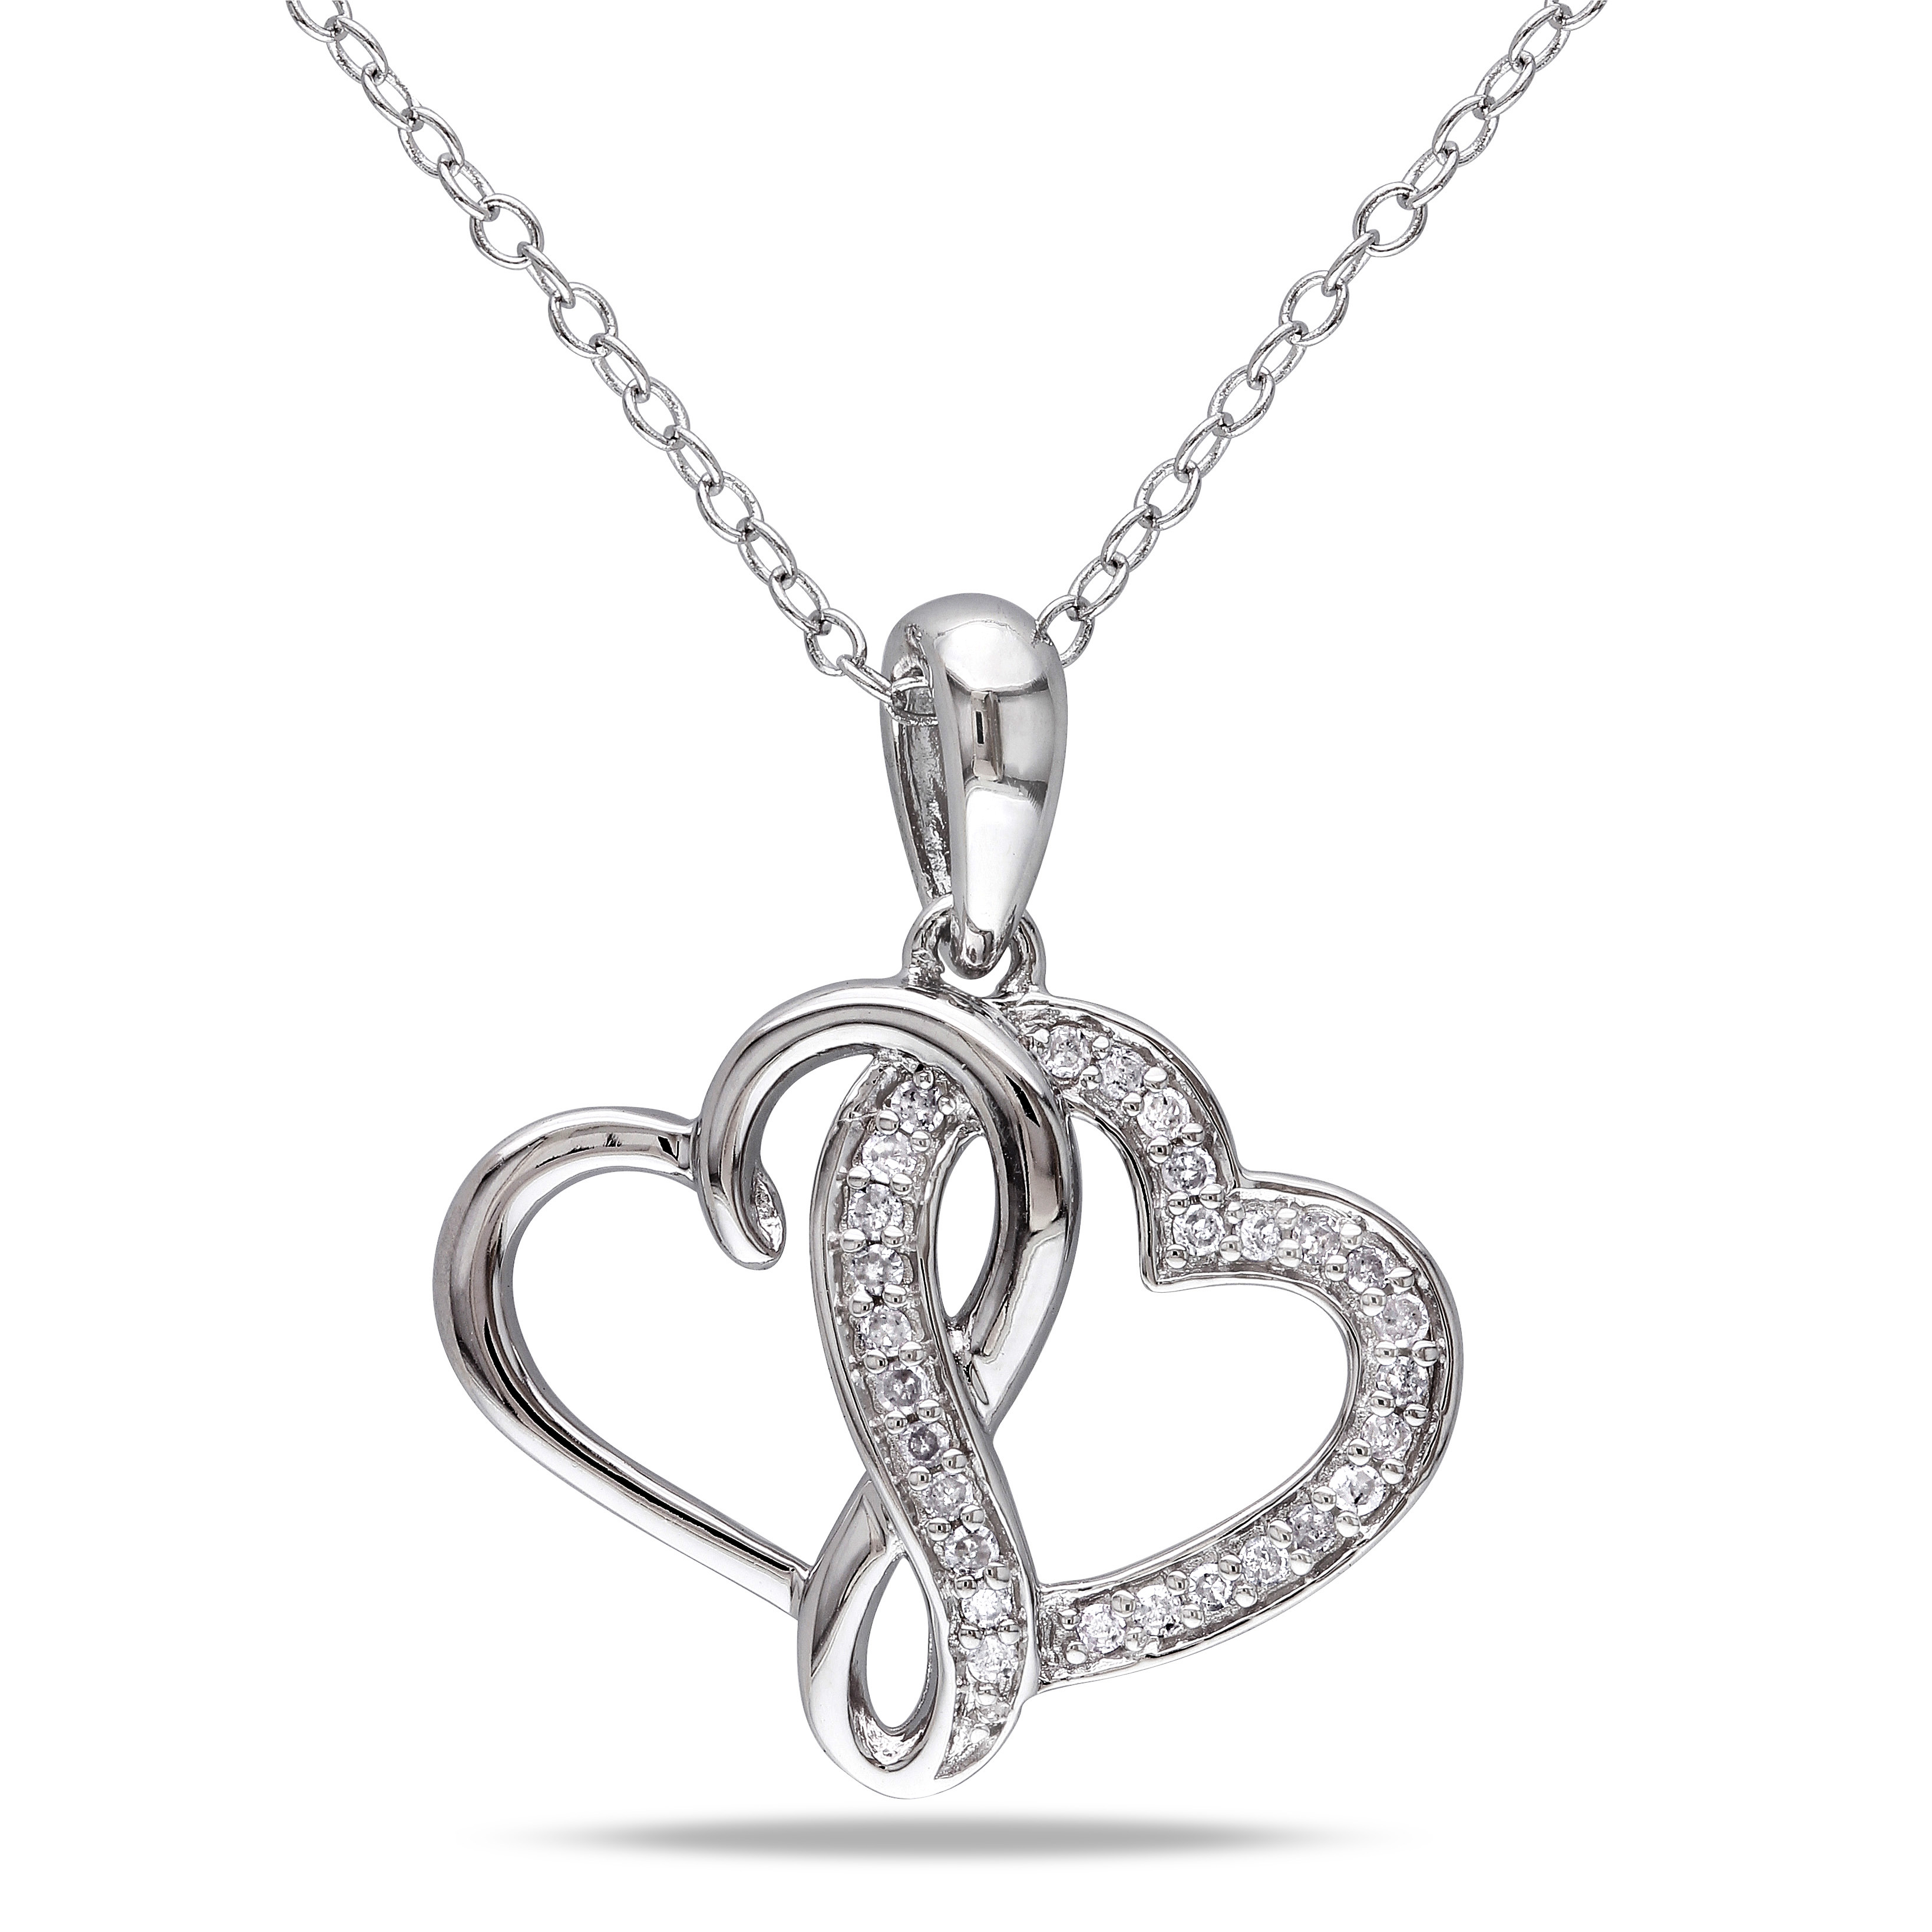 1/7 CT TW Diamond Interlocking Heart Pendant with Chain in Sterling Silver - 18 in.